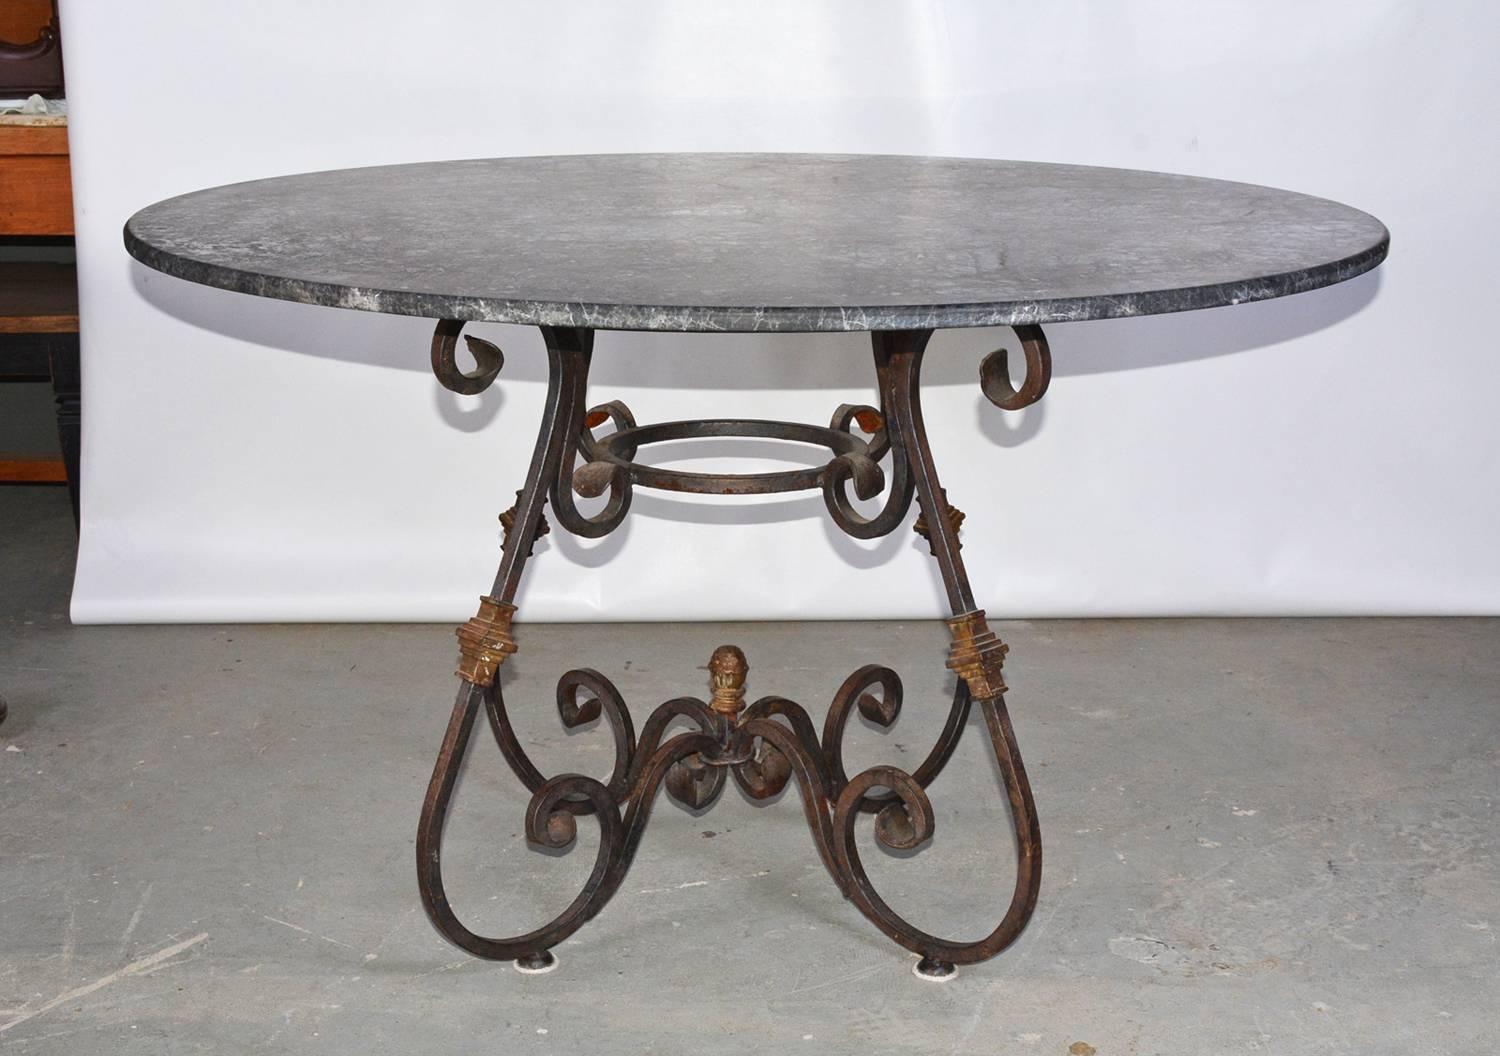 The round indoor or outdoor metal base garden dining table marries a French continental baroque style wrought iron base with brass decorations and a contemporary black marble top. Top and base can be sold separately. Base: $2900.00.